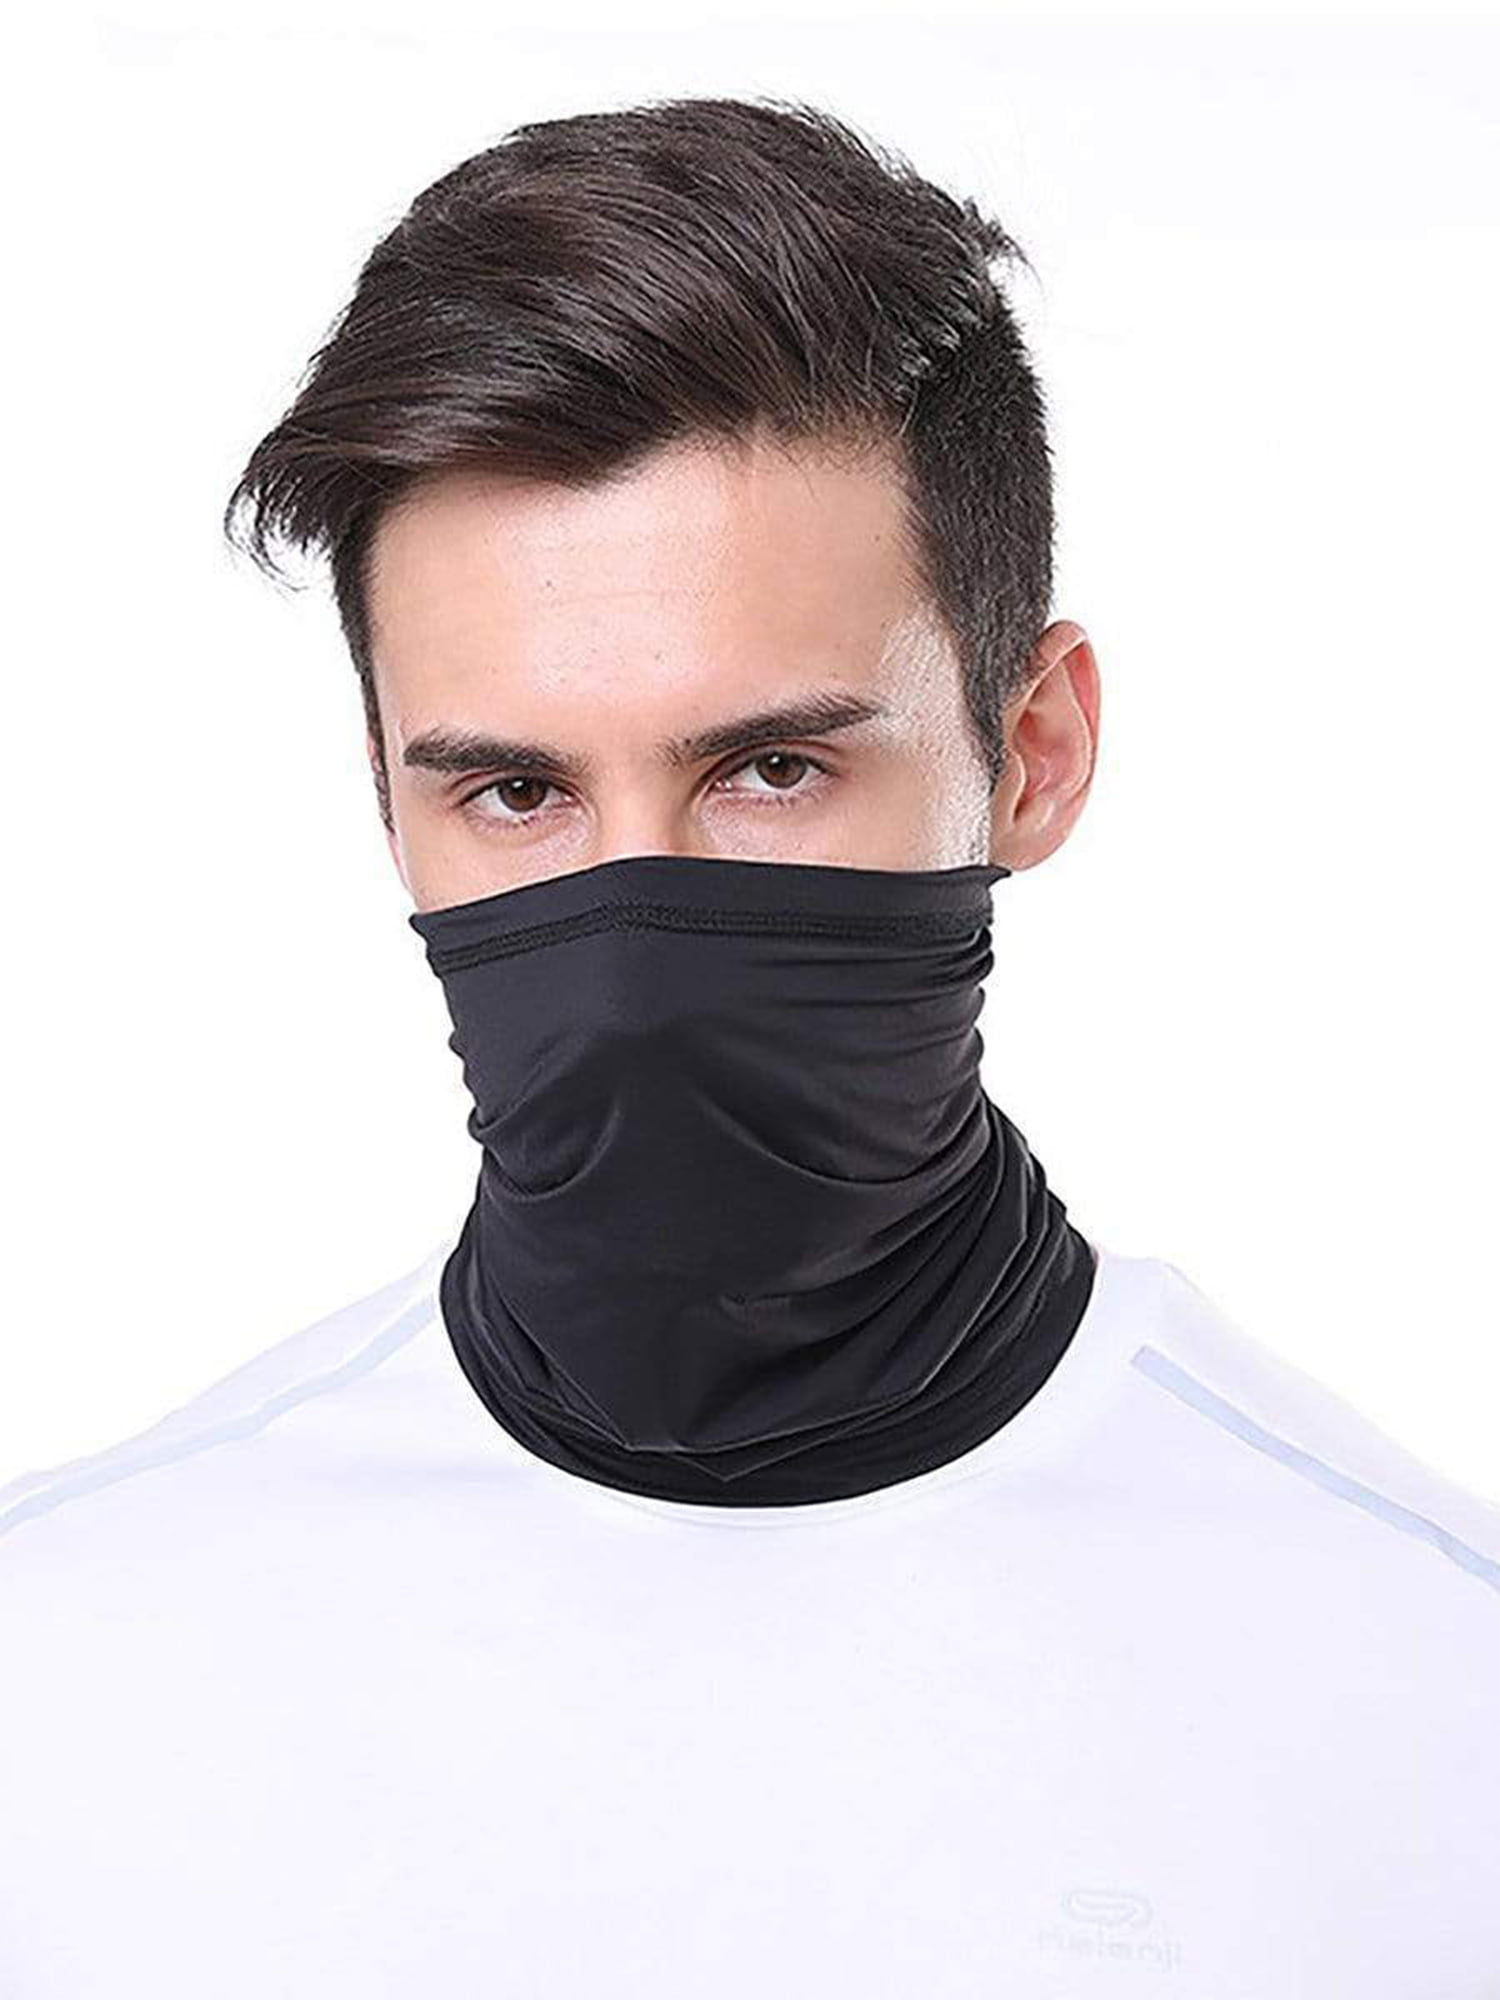 Details about   Face Mask Bandana Covering Scarf Neck Gaiter Headband Snood Reusable Breathable 